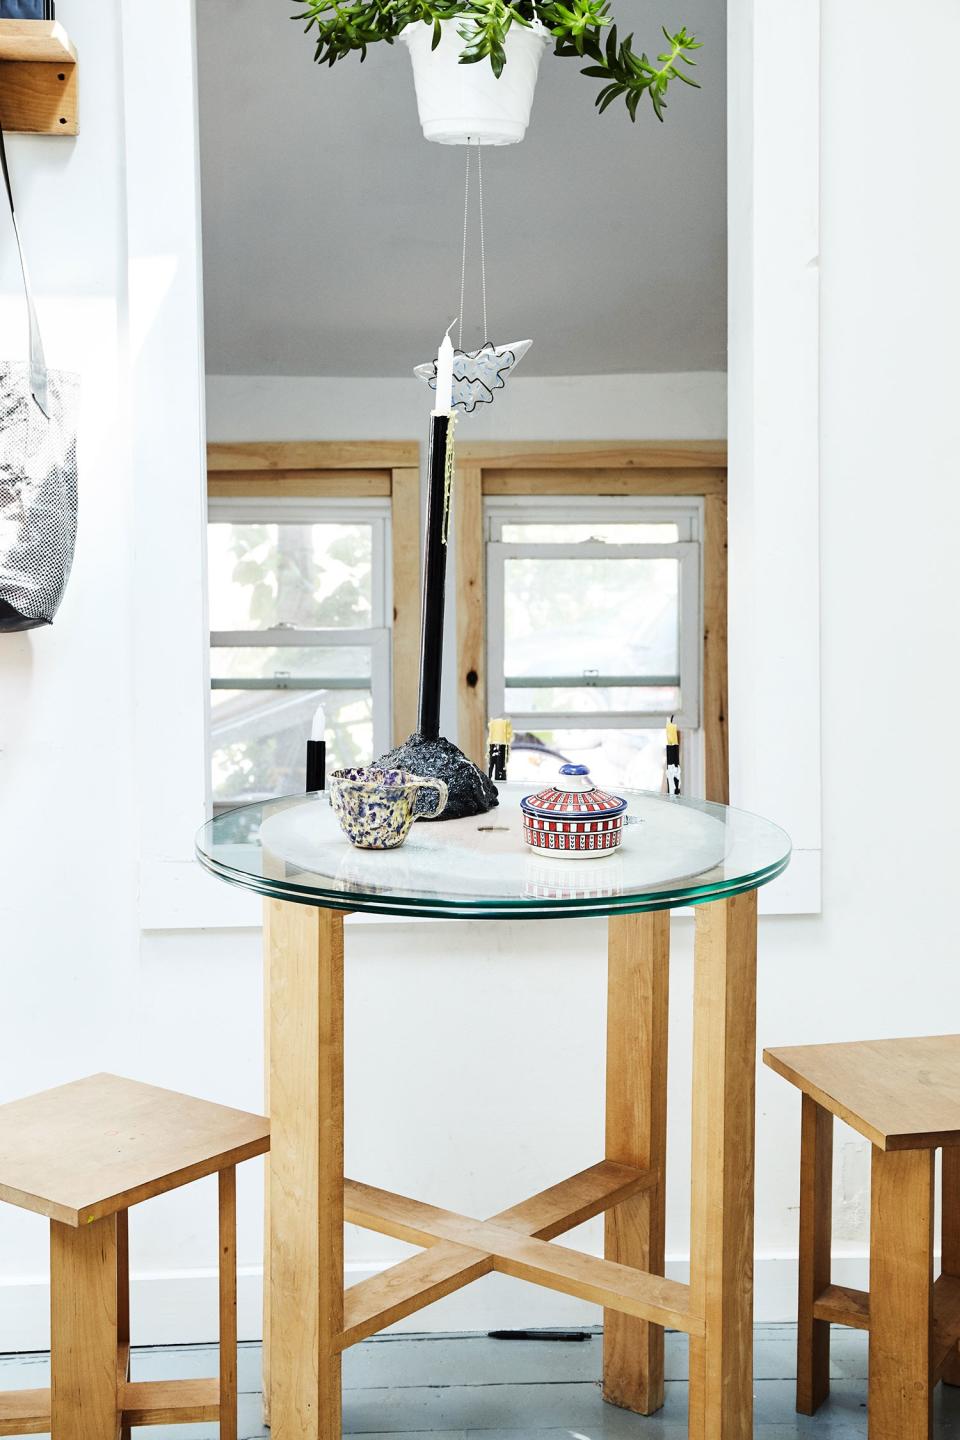 There’s even space for a quirky breakfast nook, with a table Elise made herself.